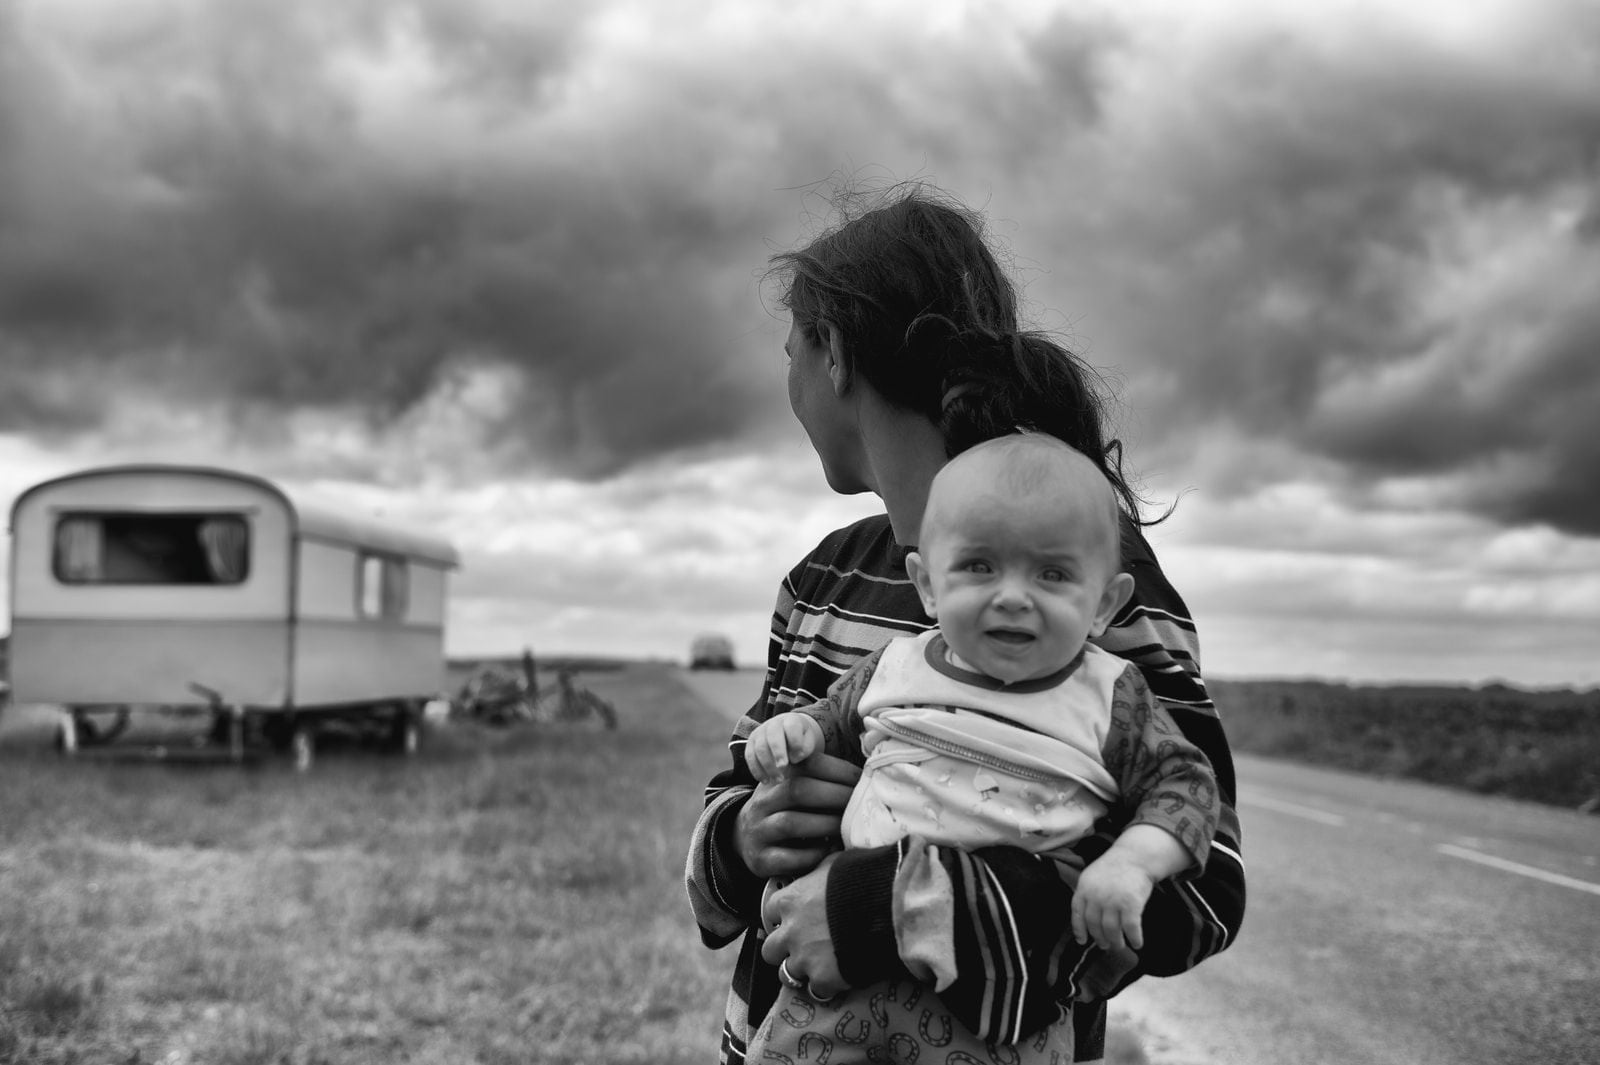 gray scale photography of woman carrying baby looking at camper trailer